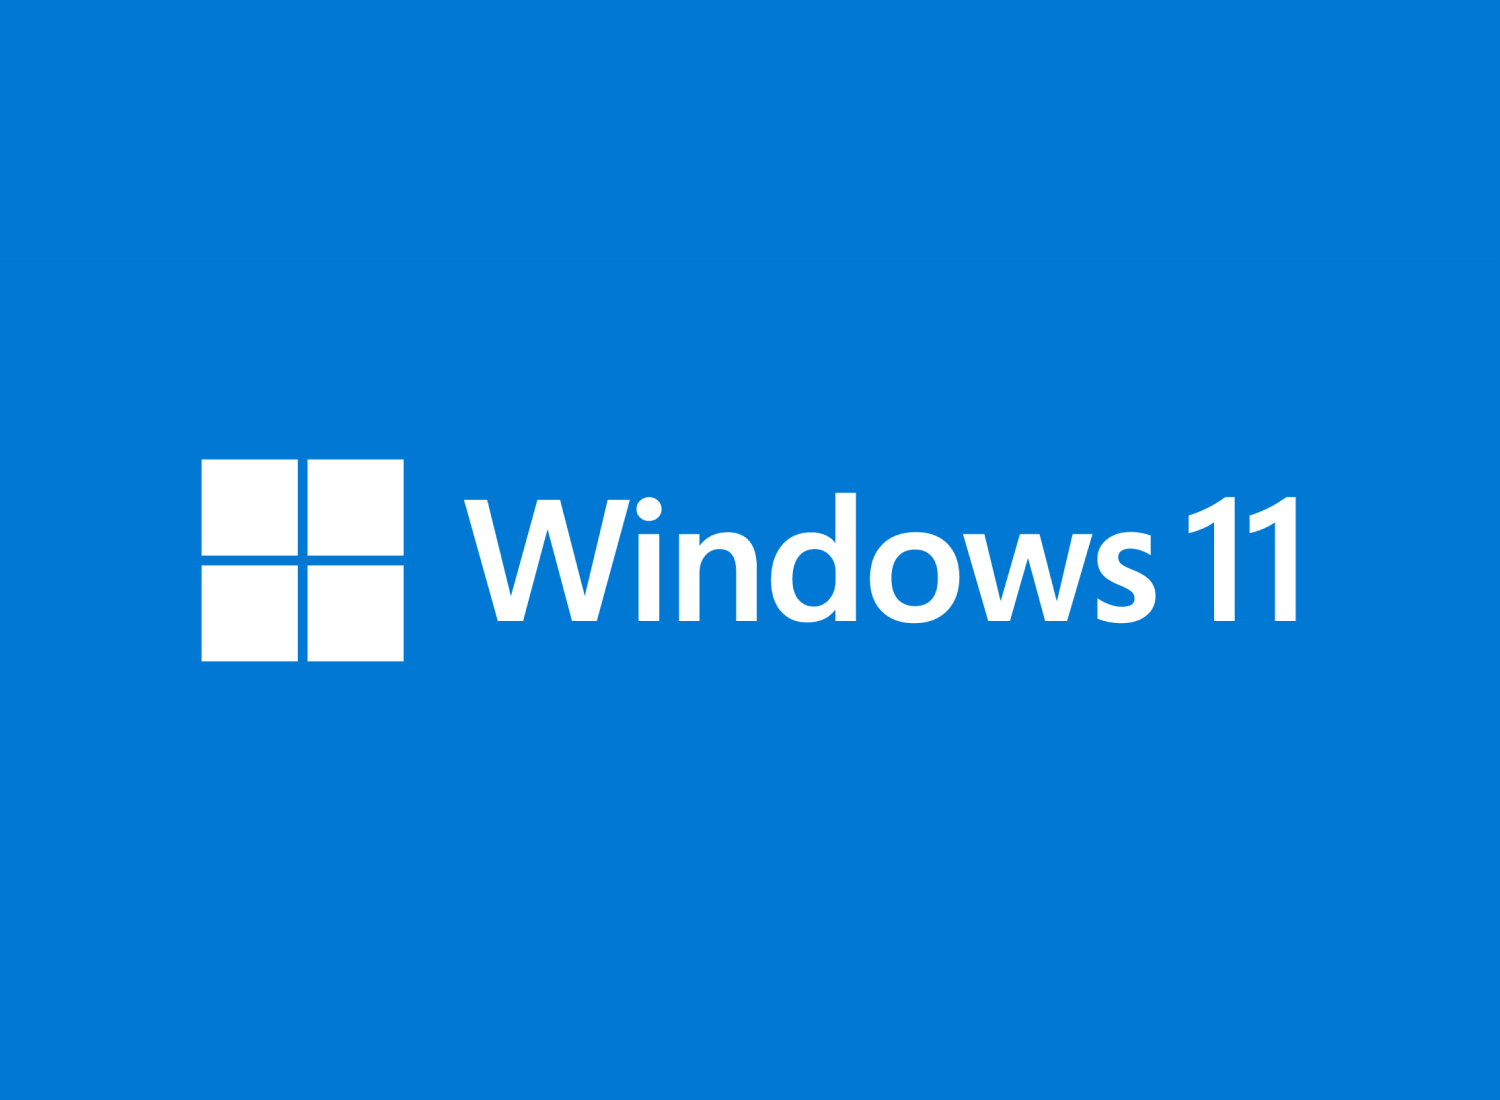 Releasing Windows 11, version 22H2 to the Release Preview Channel